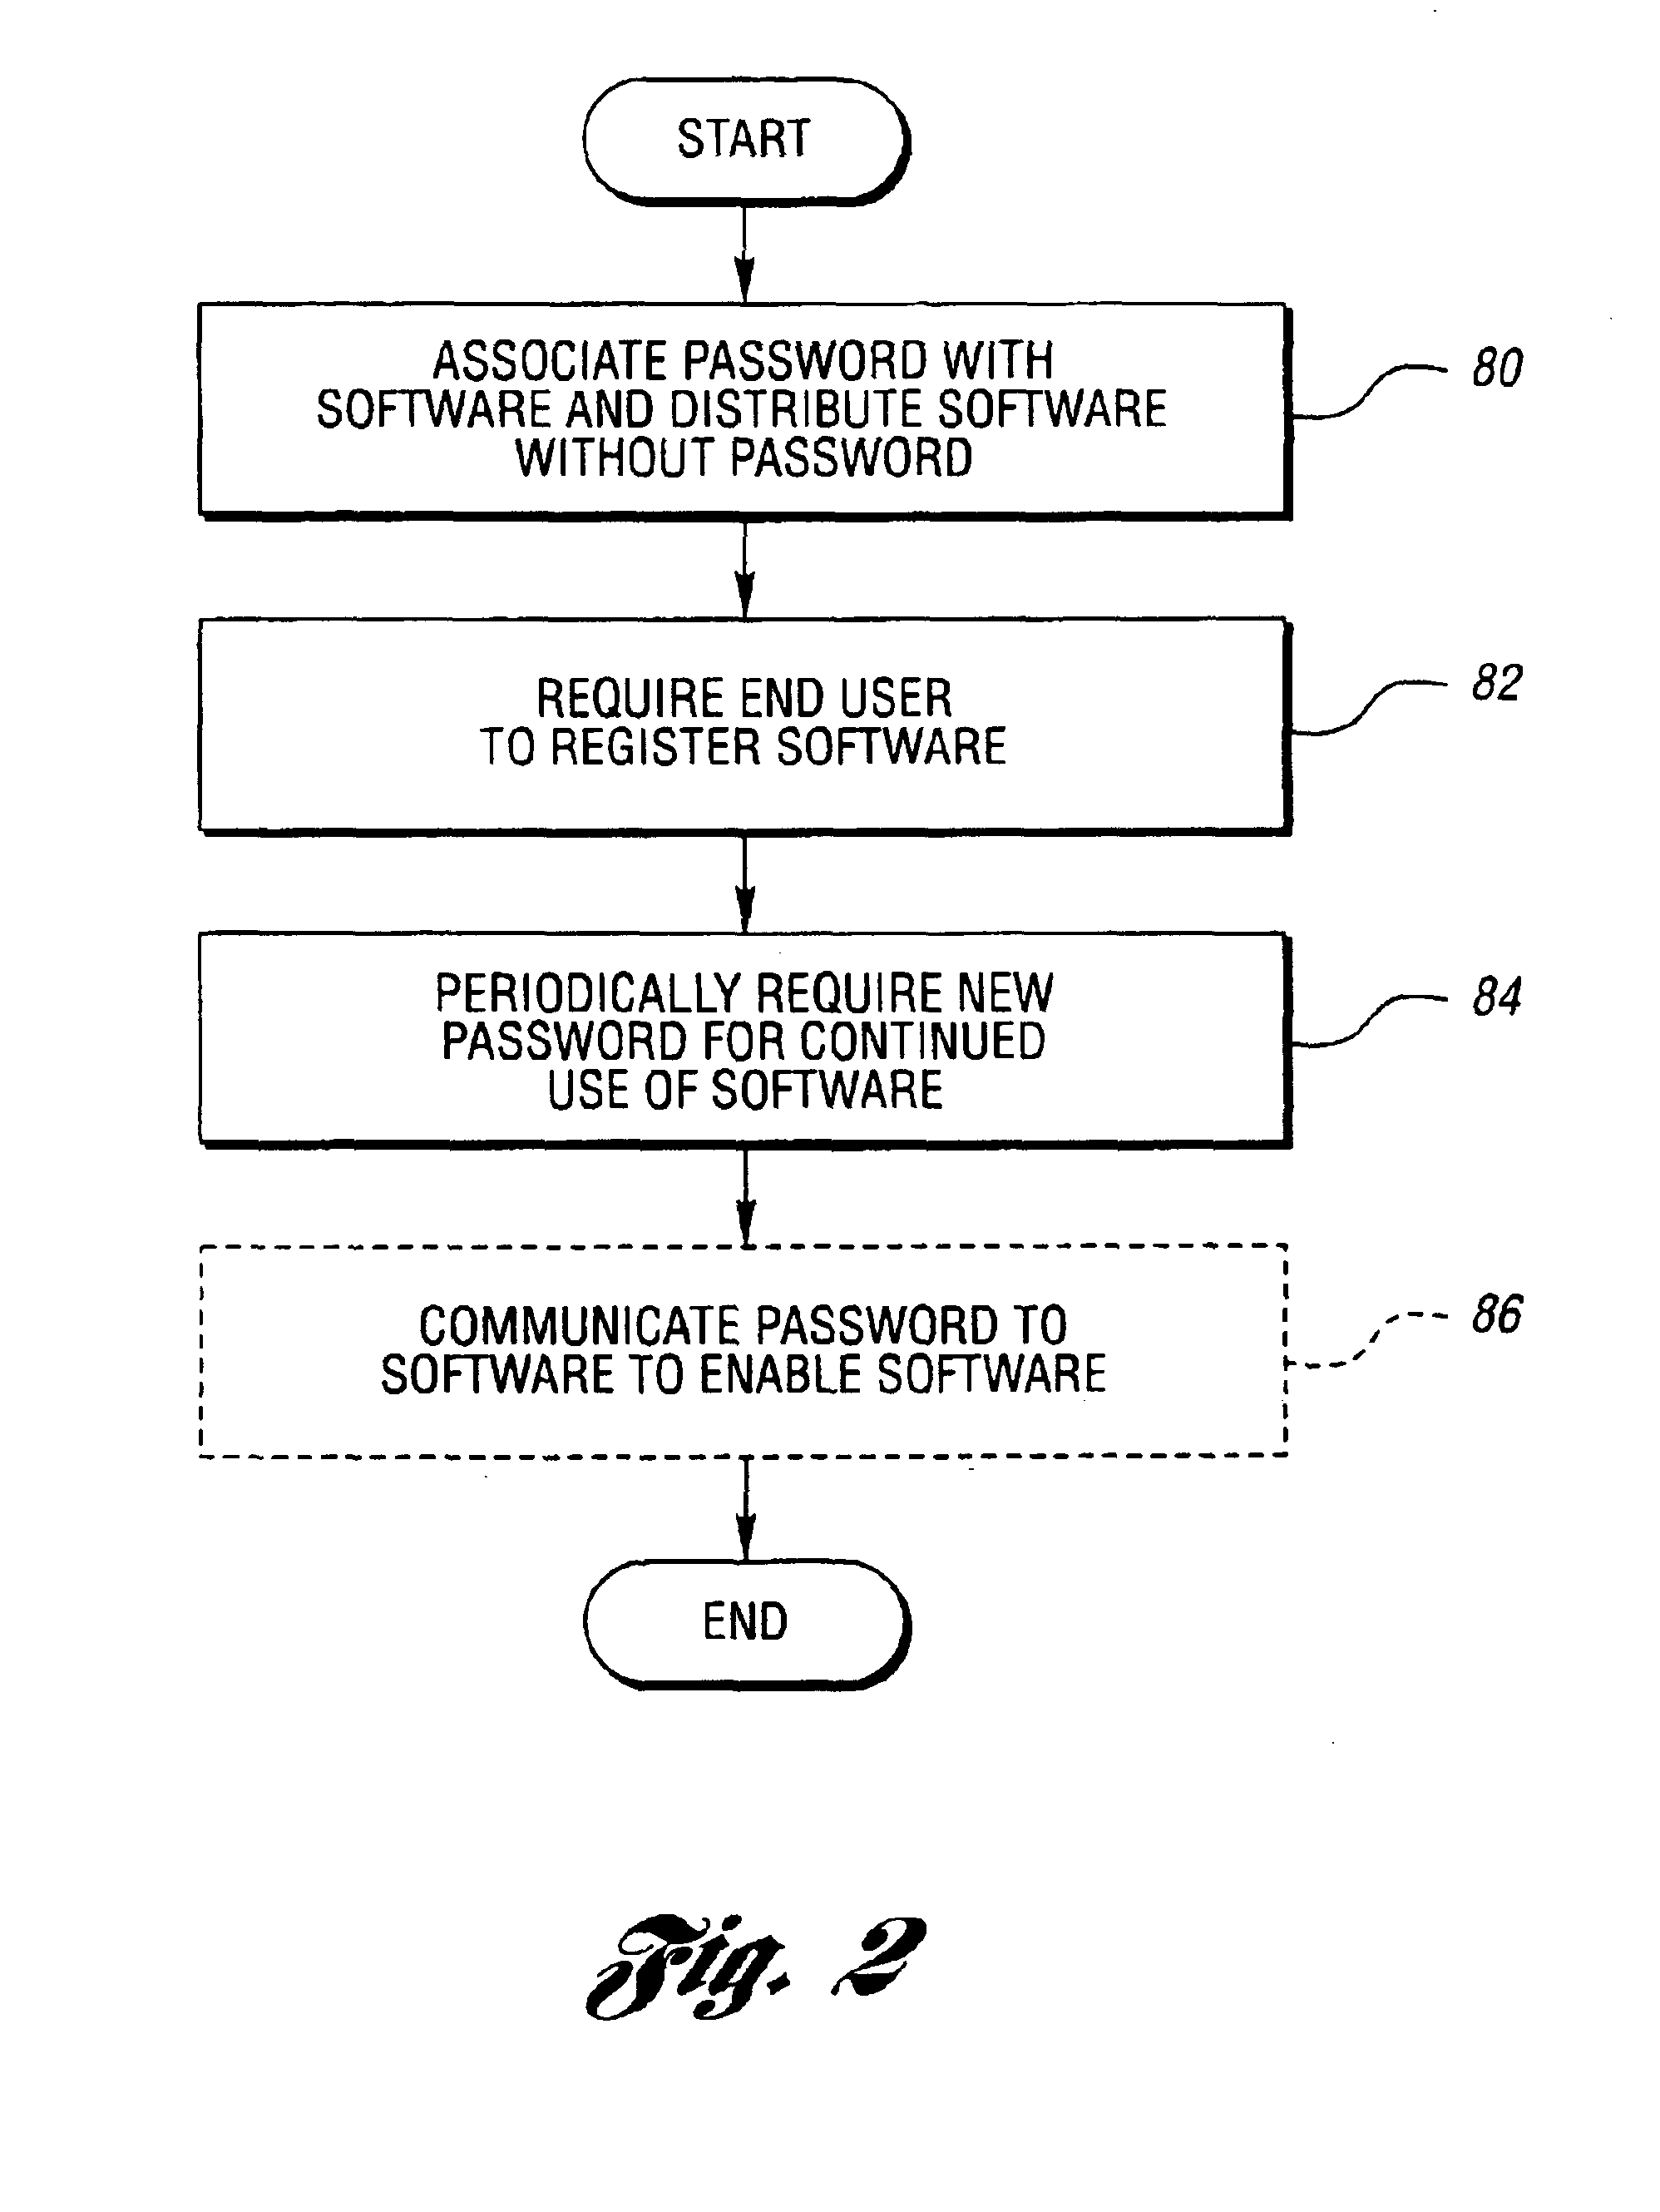 Method for monitoring software using encryption including digital signatures/certificates